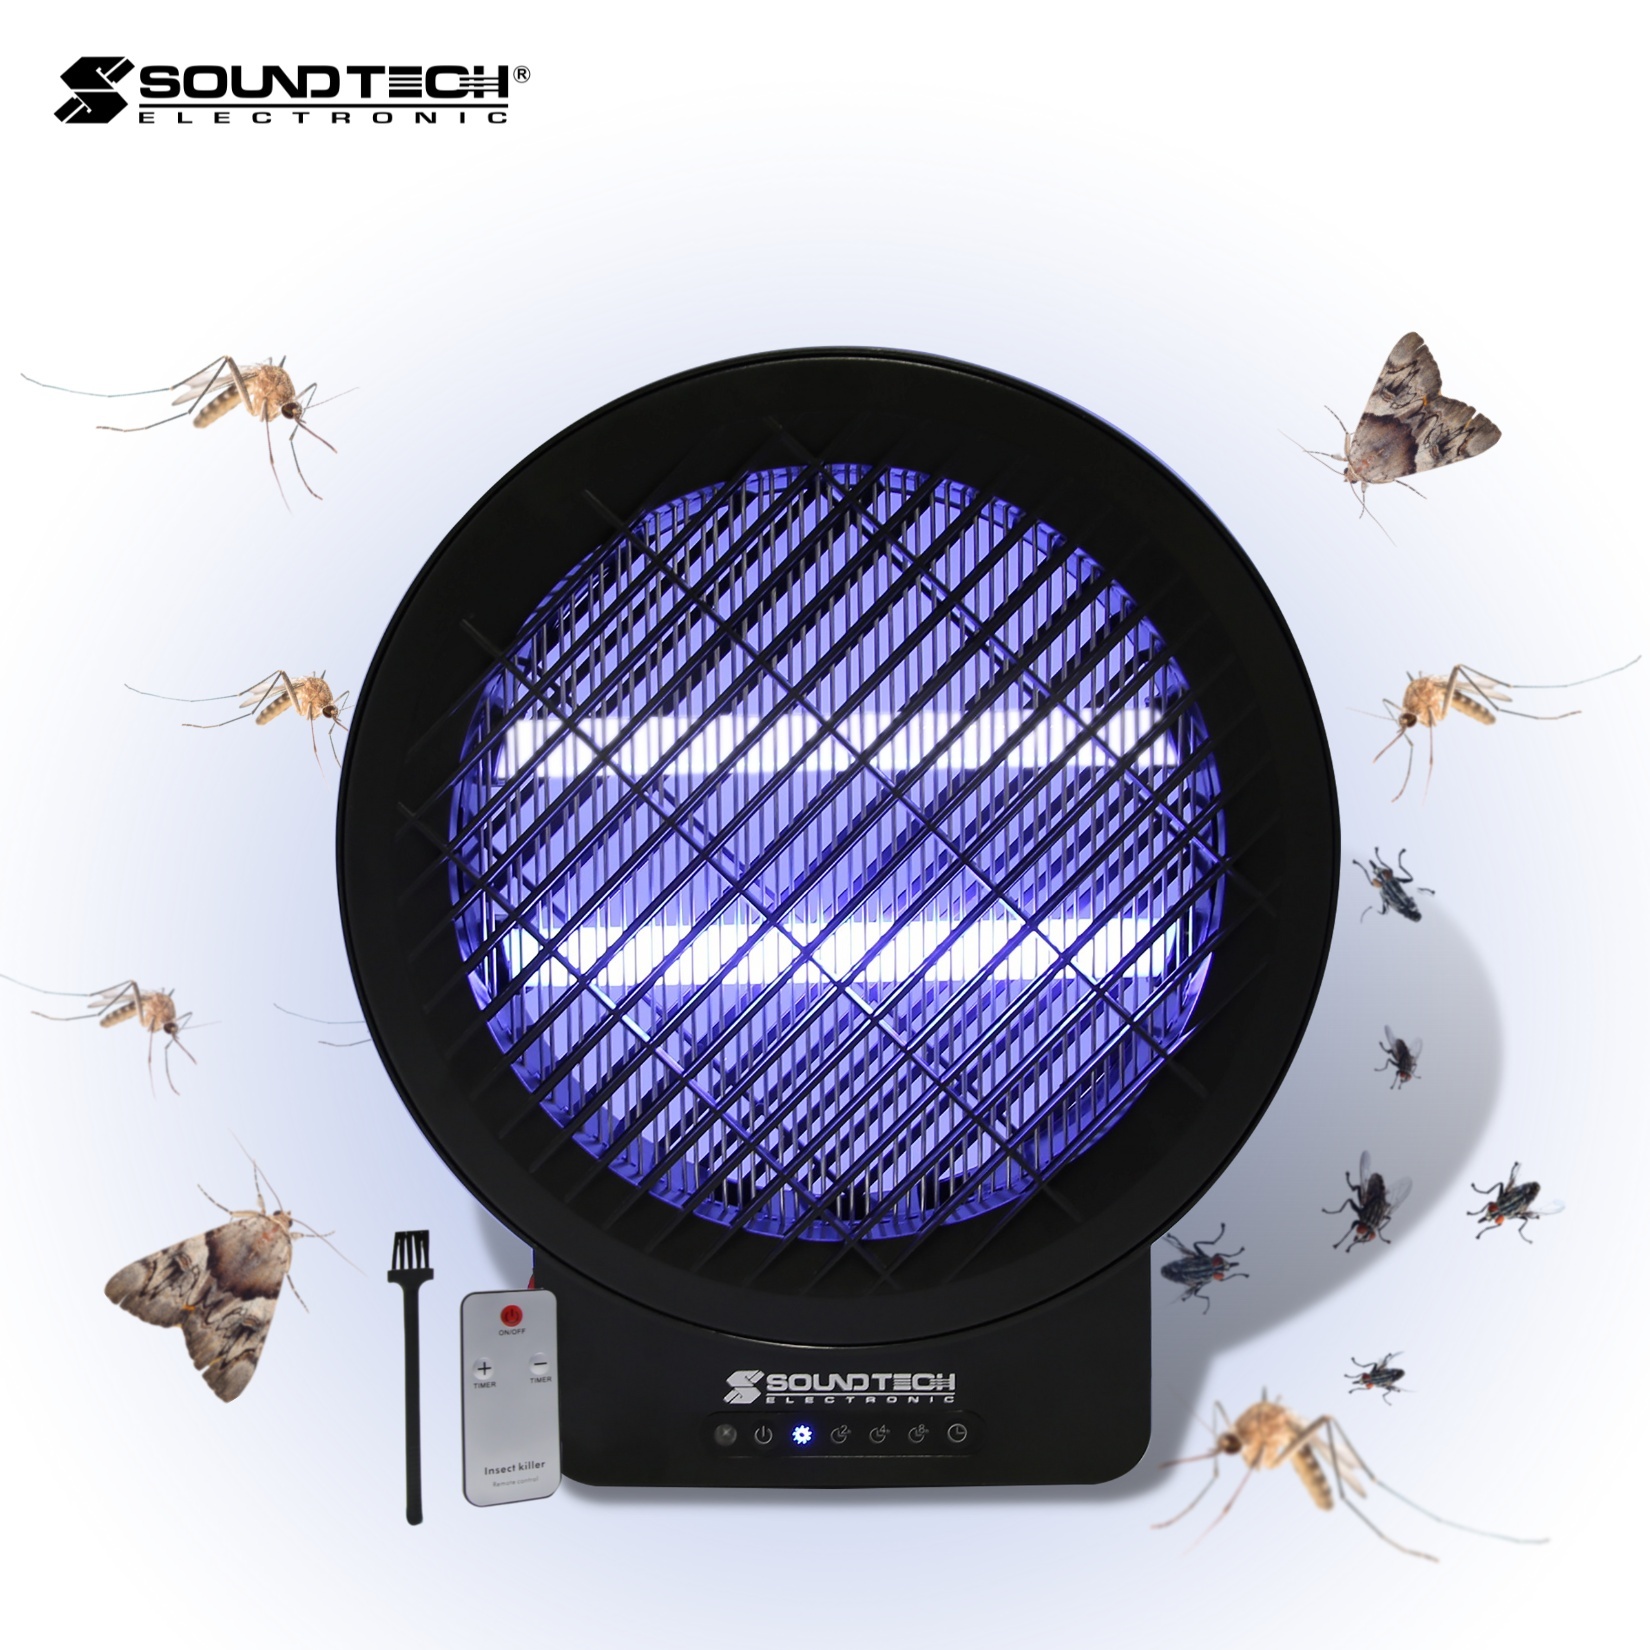 soundteoh-m-series-uva-lamp-mosquito-killer-with-remote-control-and-timer-mr-712